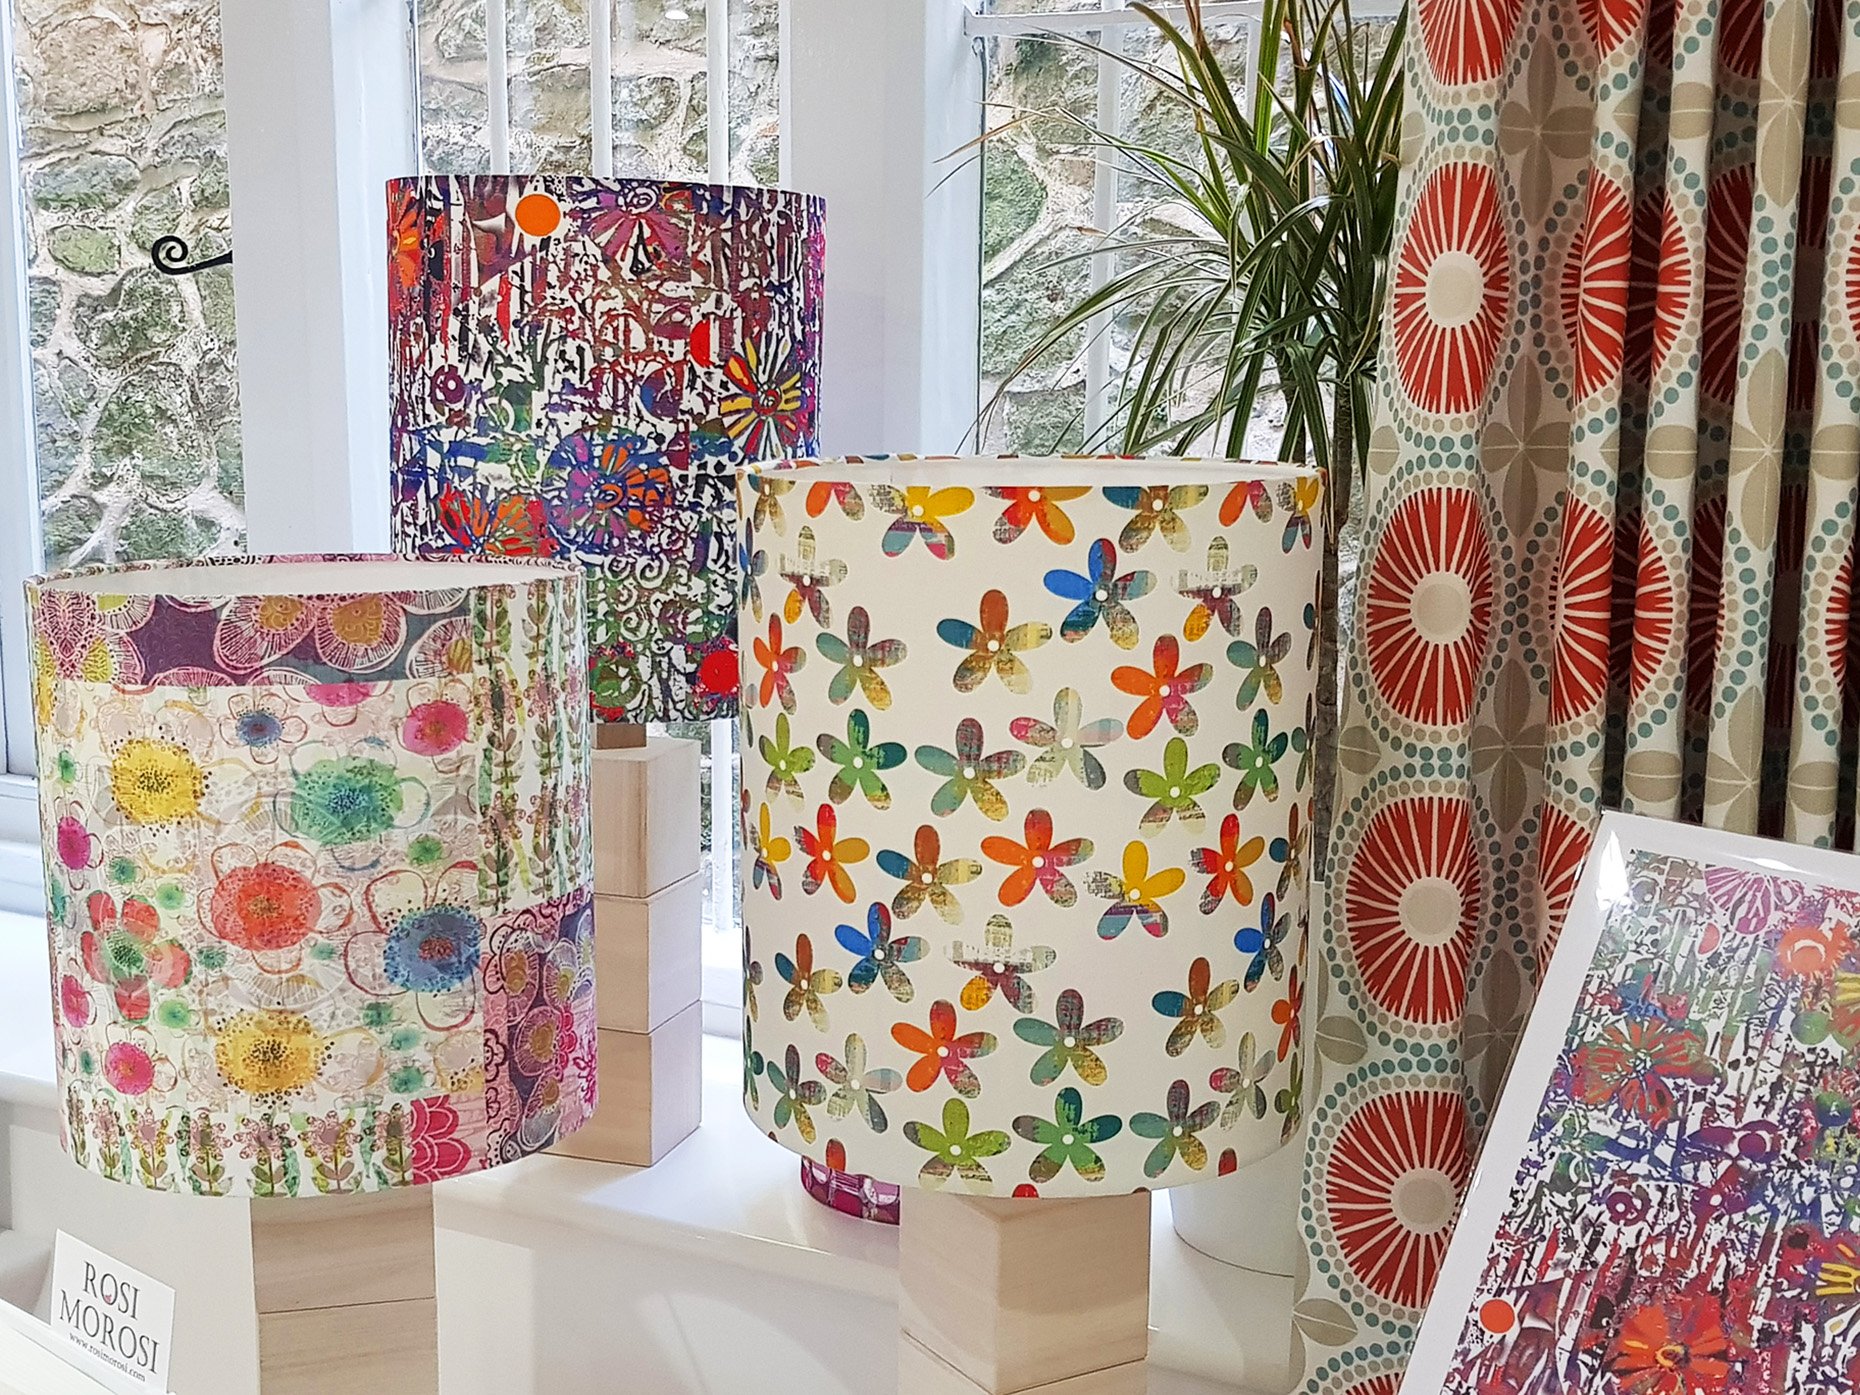 Lampshades, curtains and prints created by Claire Morosi for Rosimorosi